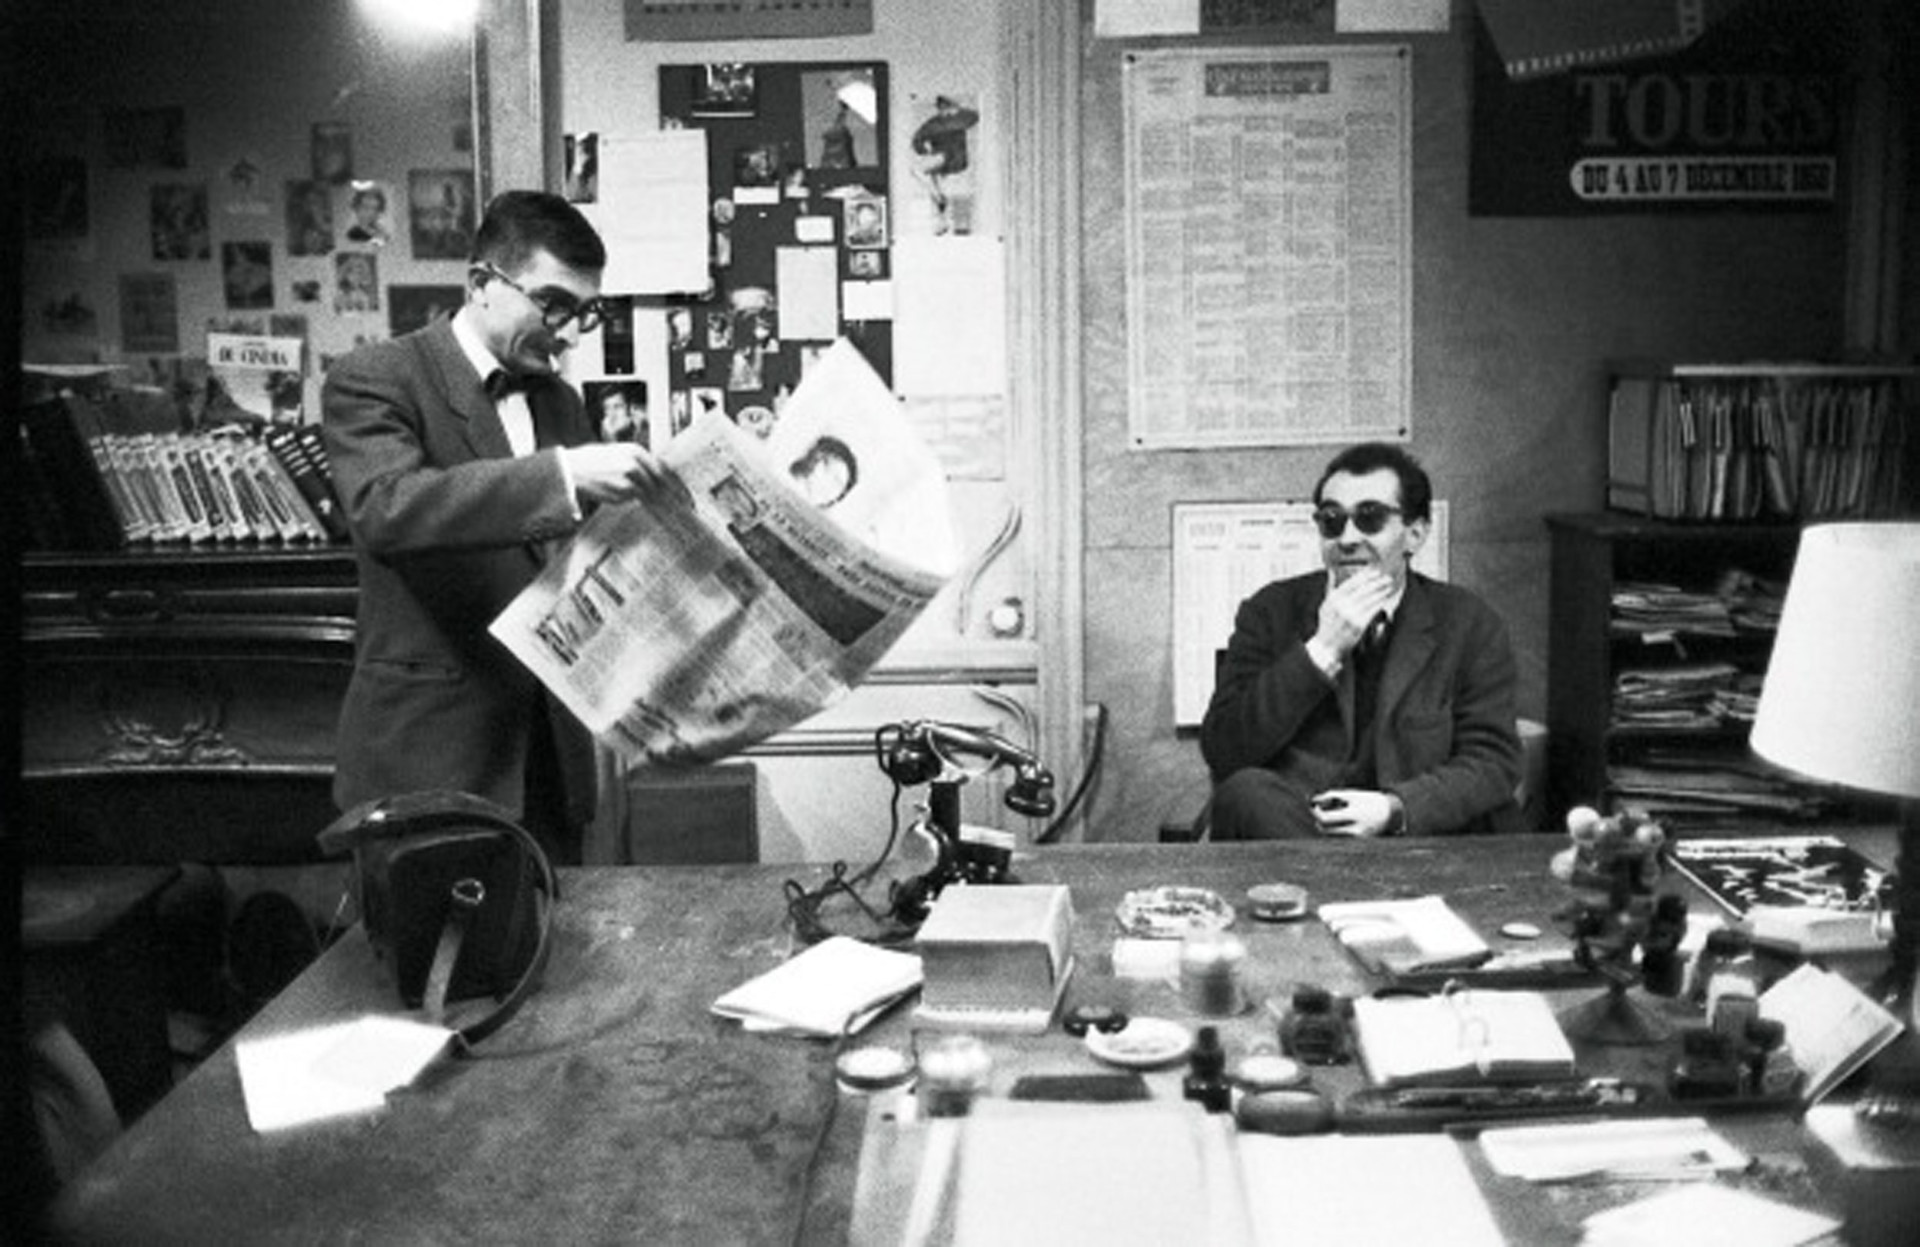 A Film Critic Reflects on the Artistic Journeys and Vision of the Late French Director Jean-Luc Godard